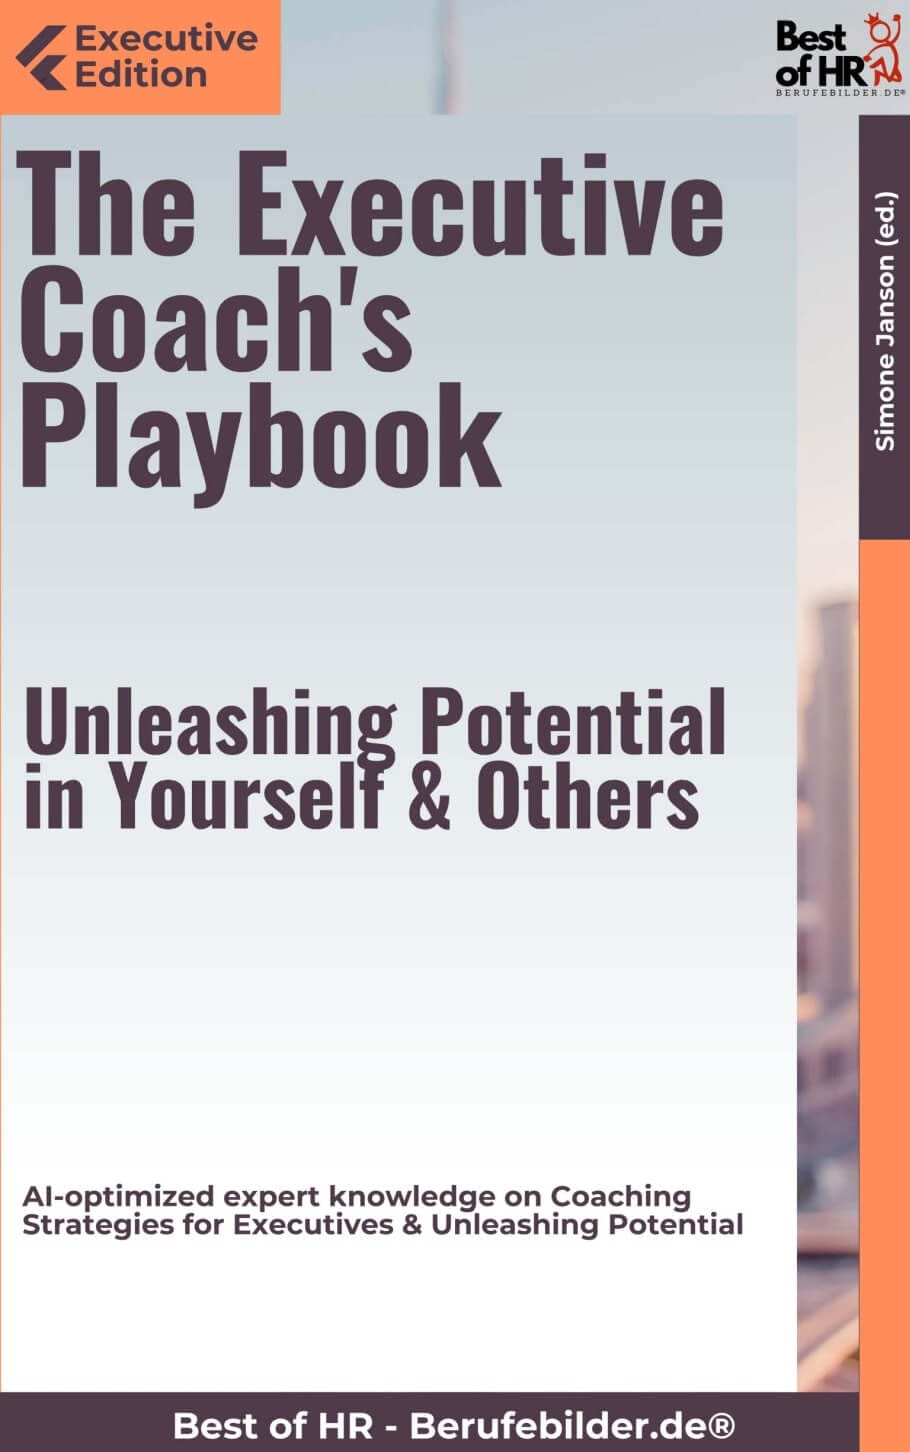 The Executive Coach’s Playbook – Unleashing Potential in Yourself & Others (Engl. Version)